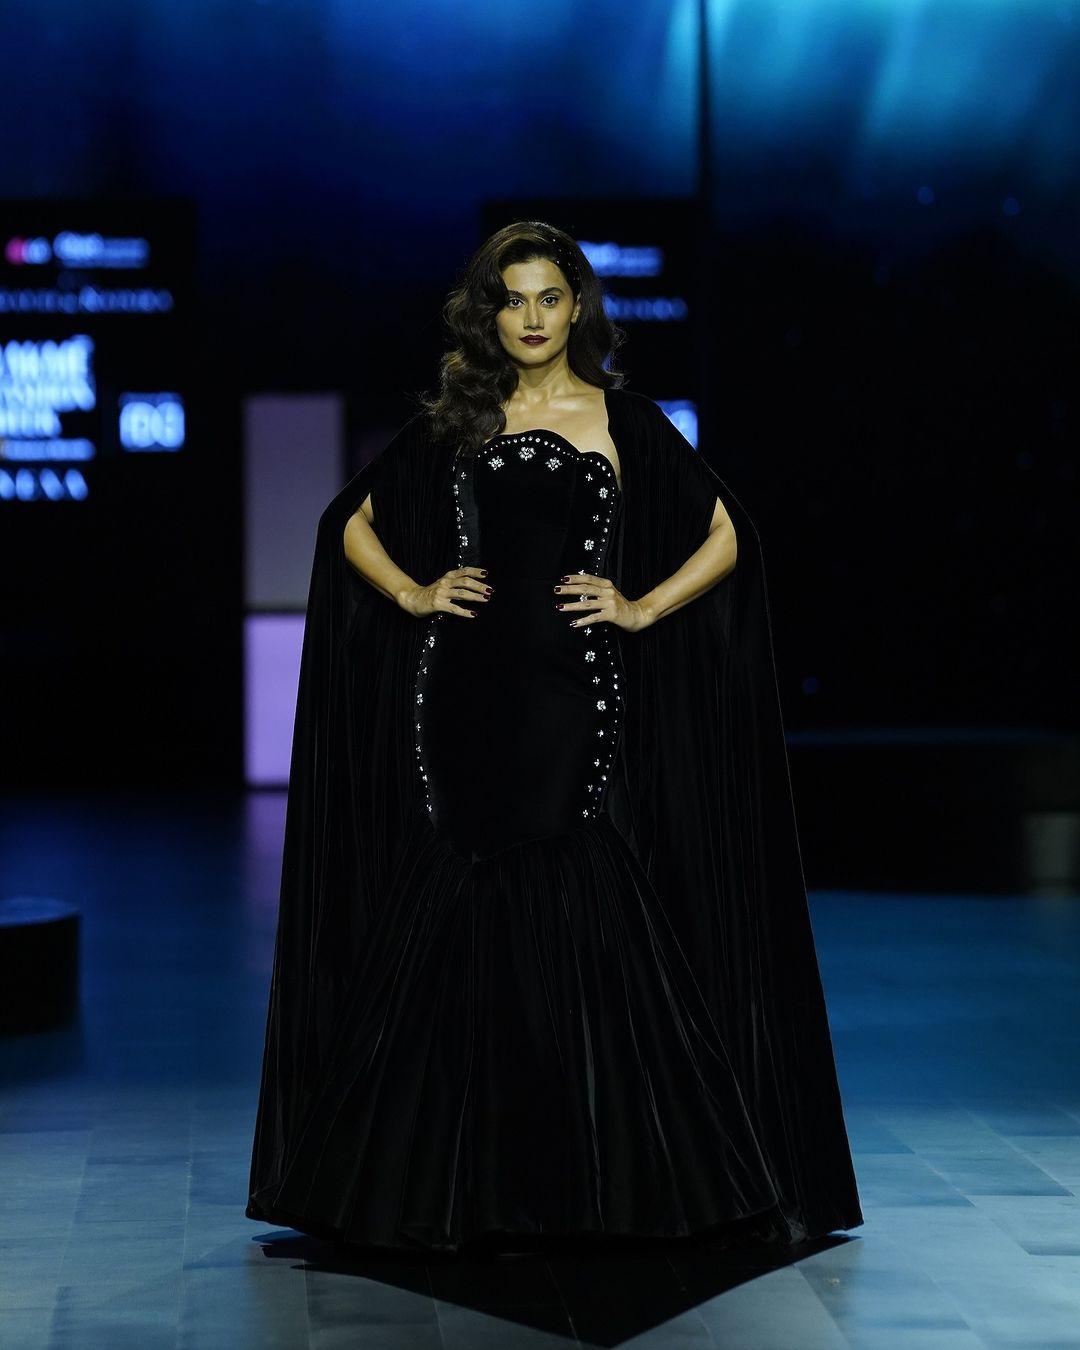 Taapsee Pannu rocked the runway for LG MoodUP™ in Gauri & Nainika for Lakme Fashion Week. She looked stunning in a black dress with a mermaid silhouette.